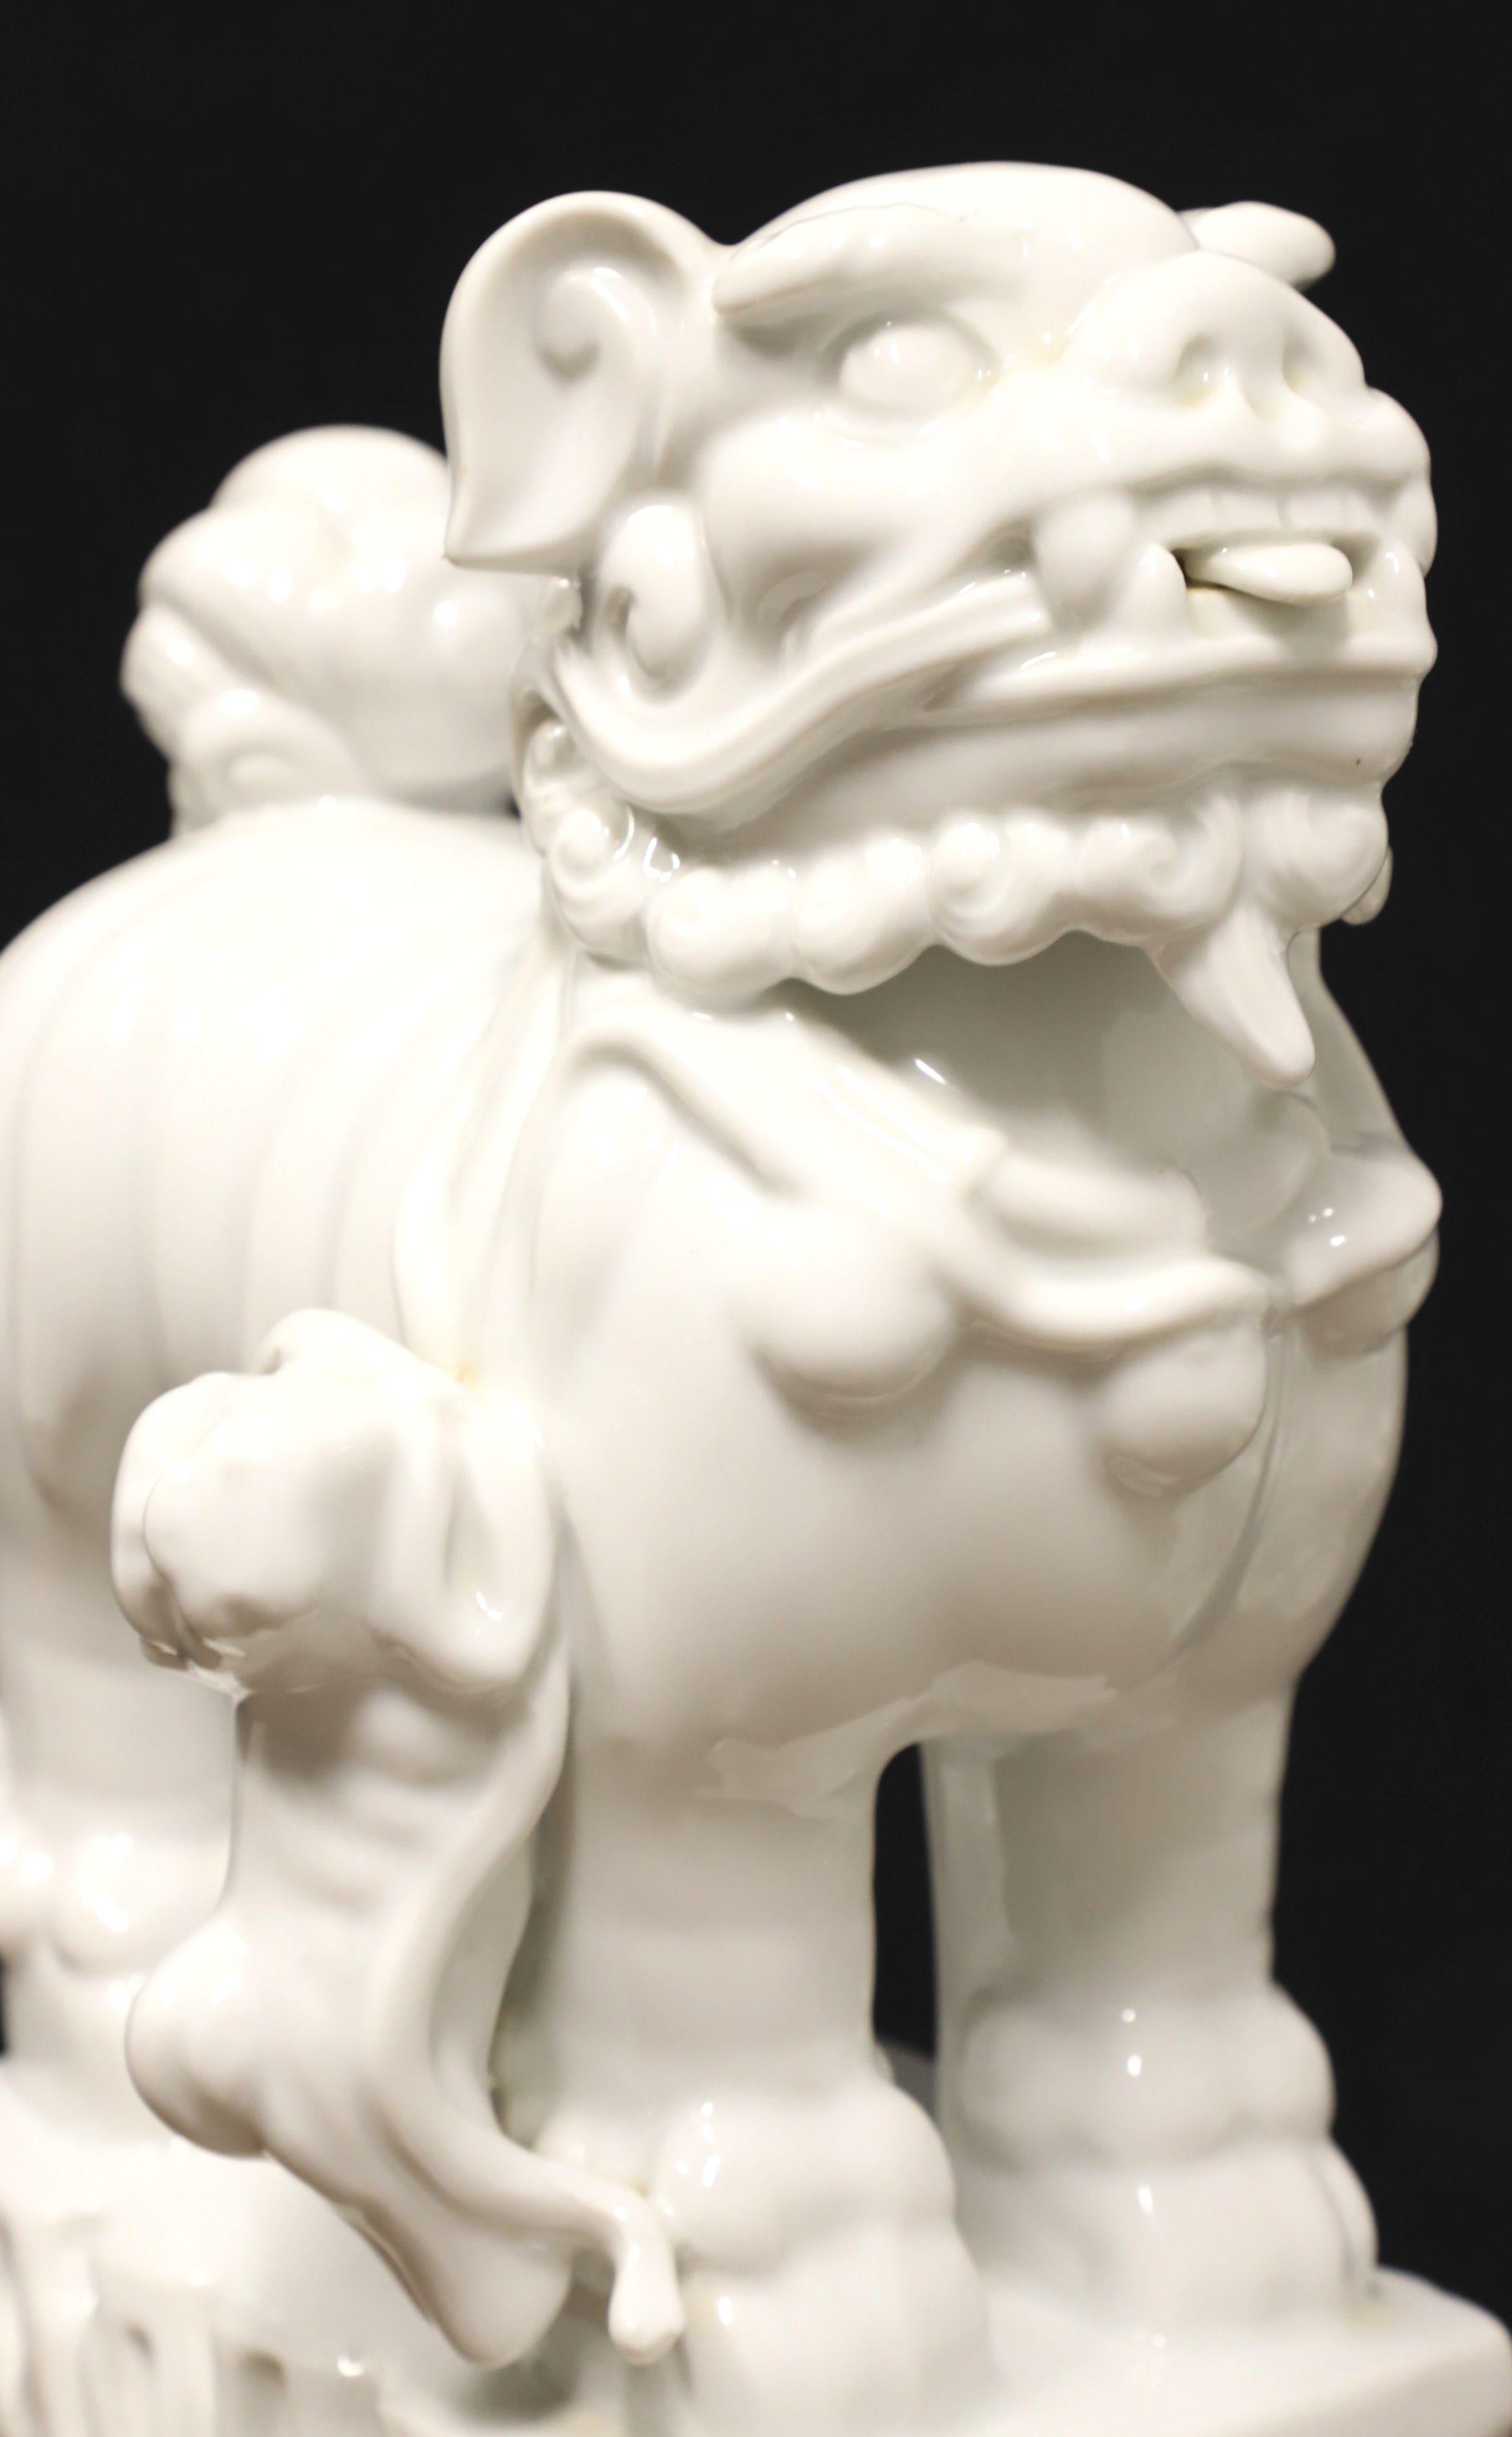 Mid 20th Century White Porcelain Foo Dogs - Pair For Sale 1